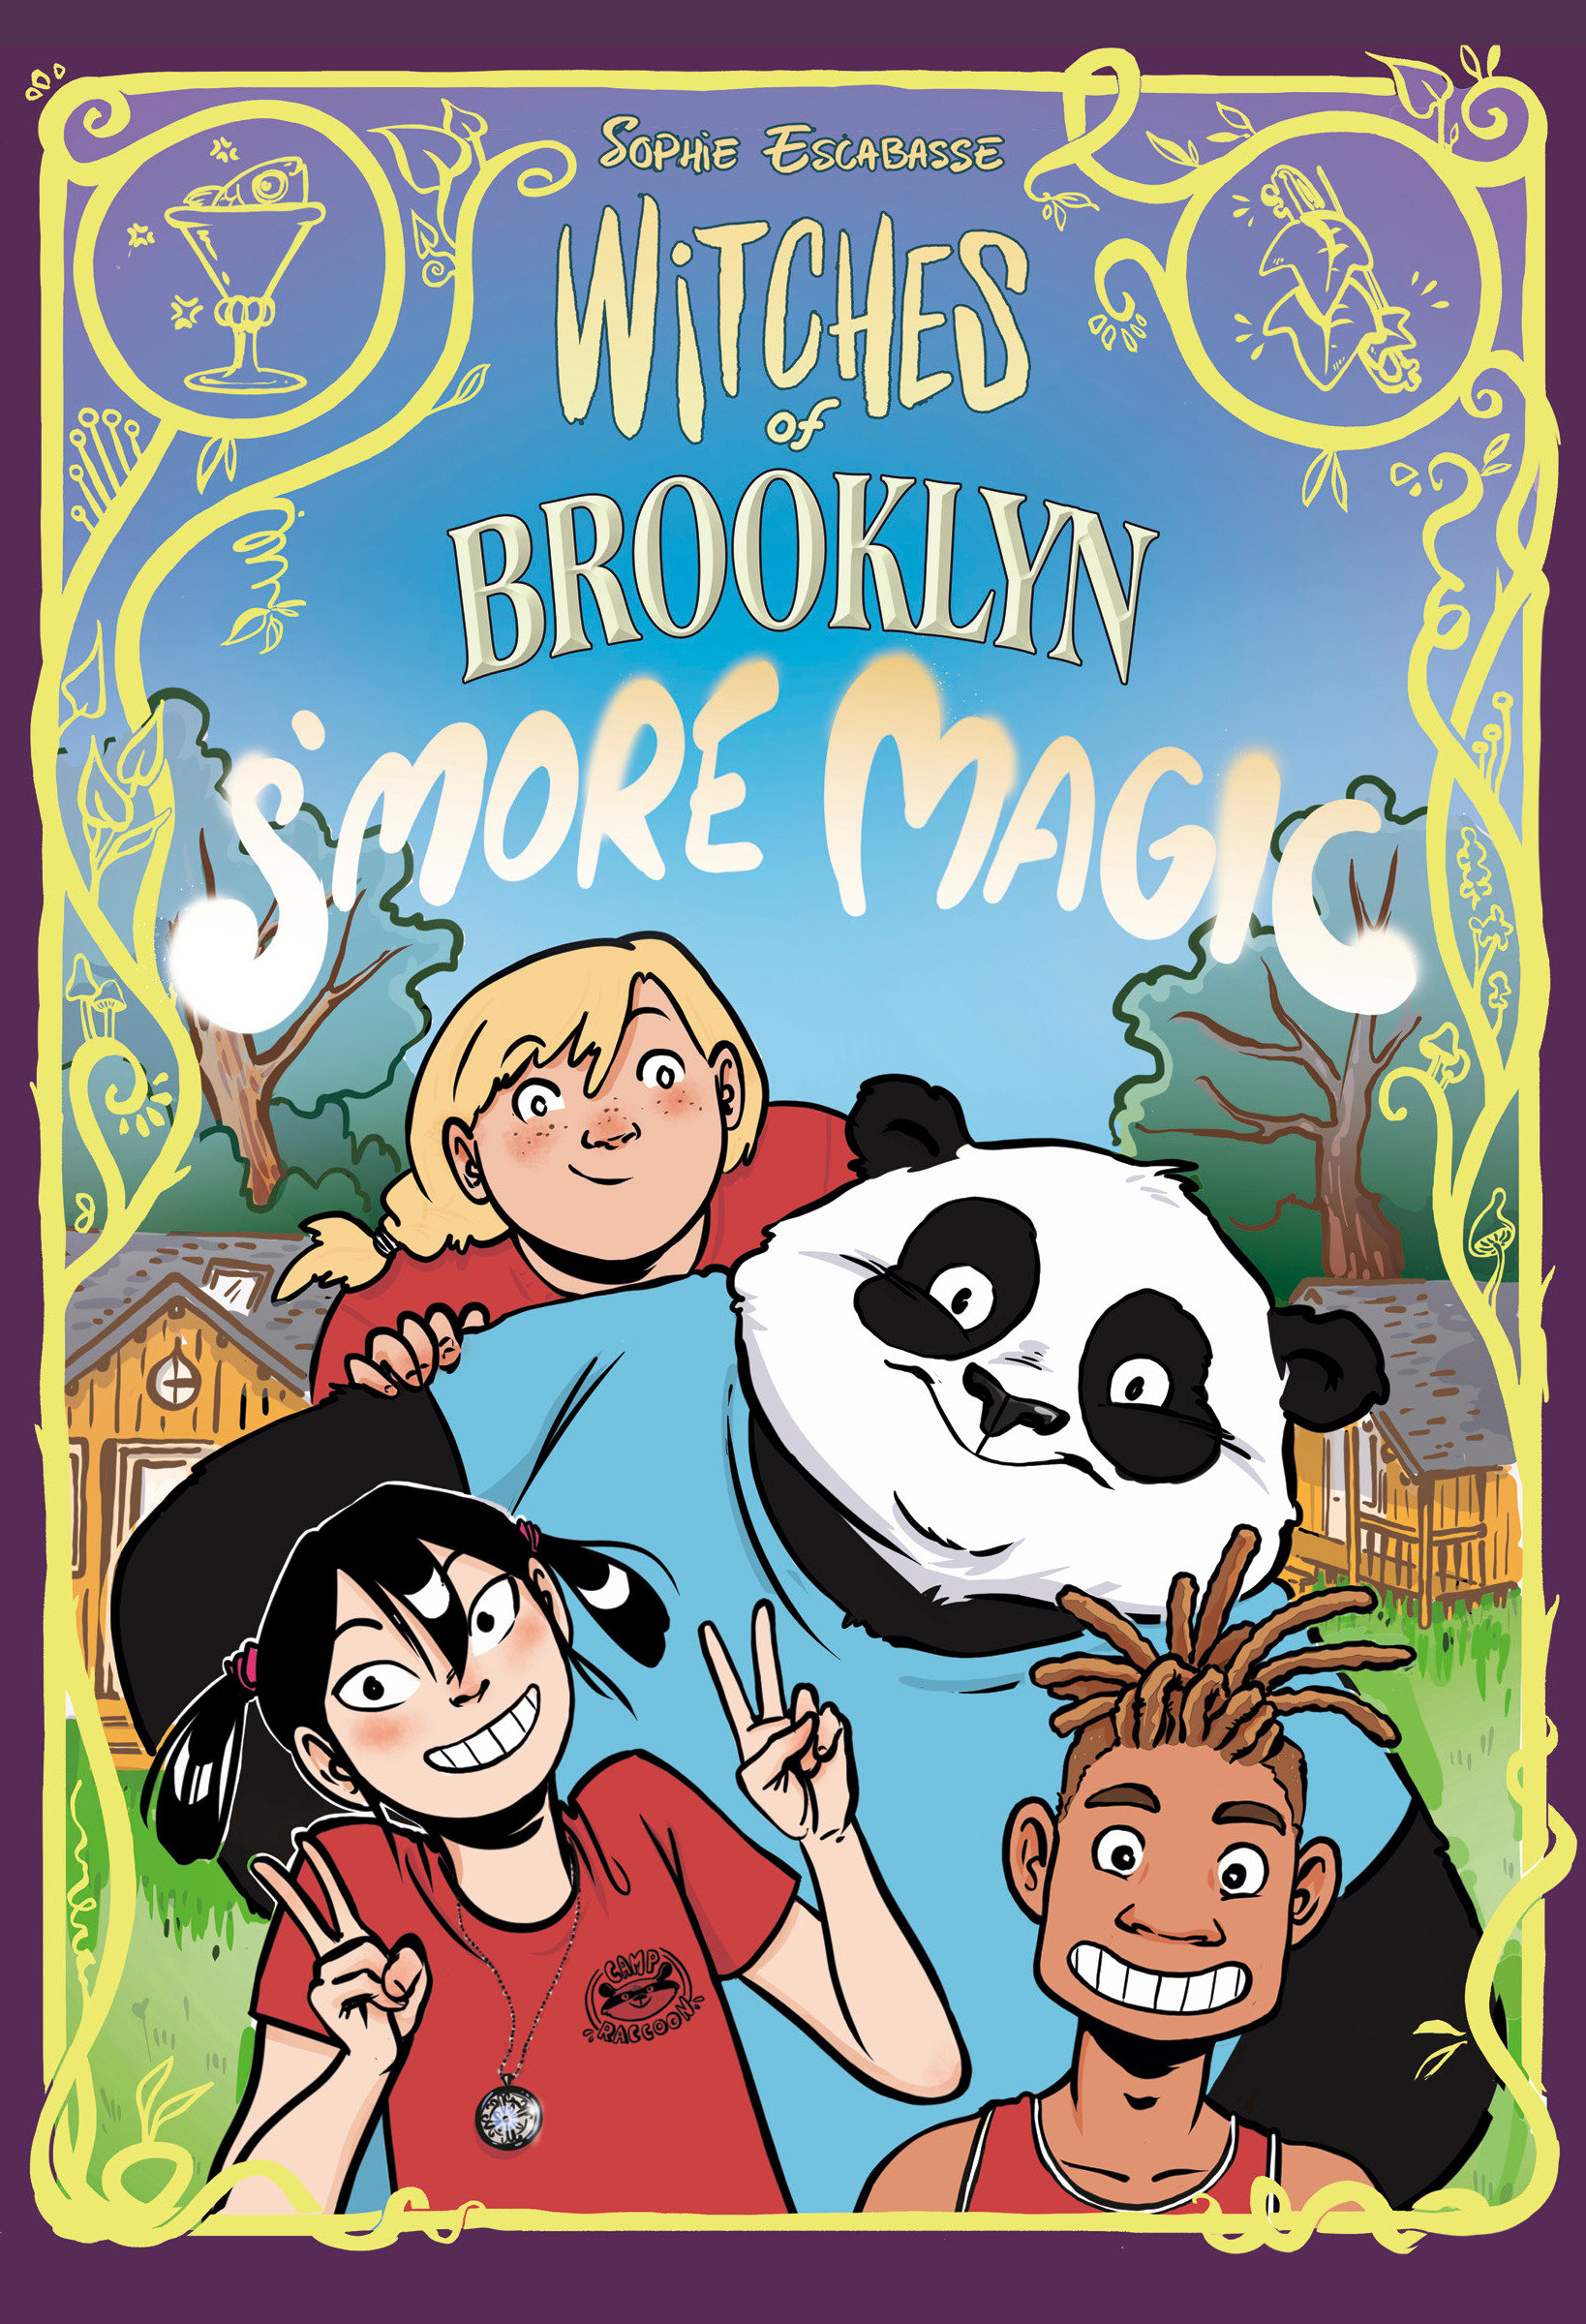 Witches of Brooklyn Graphic Novel Volume 3 S'more Magic